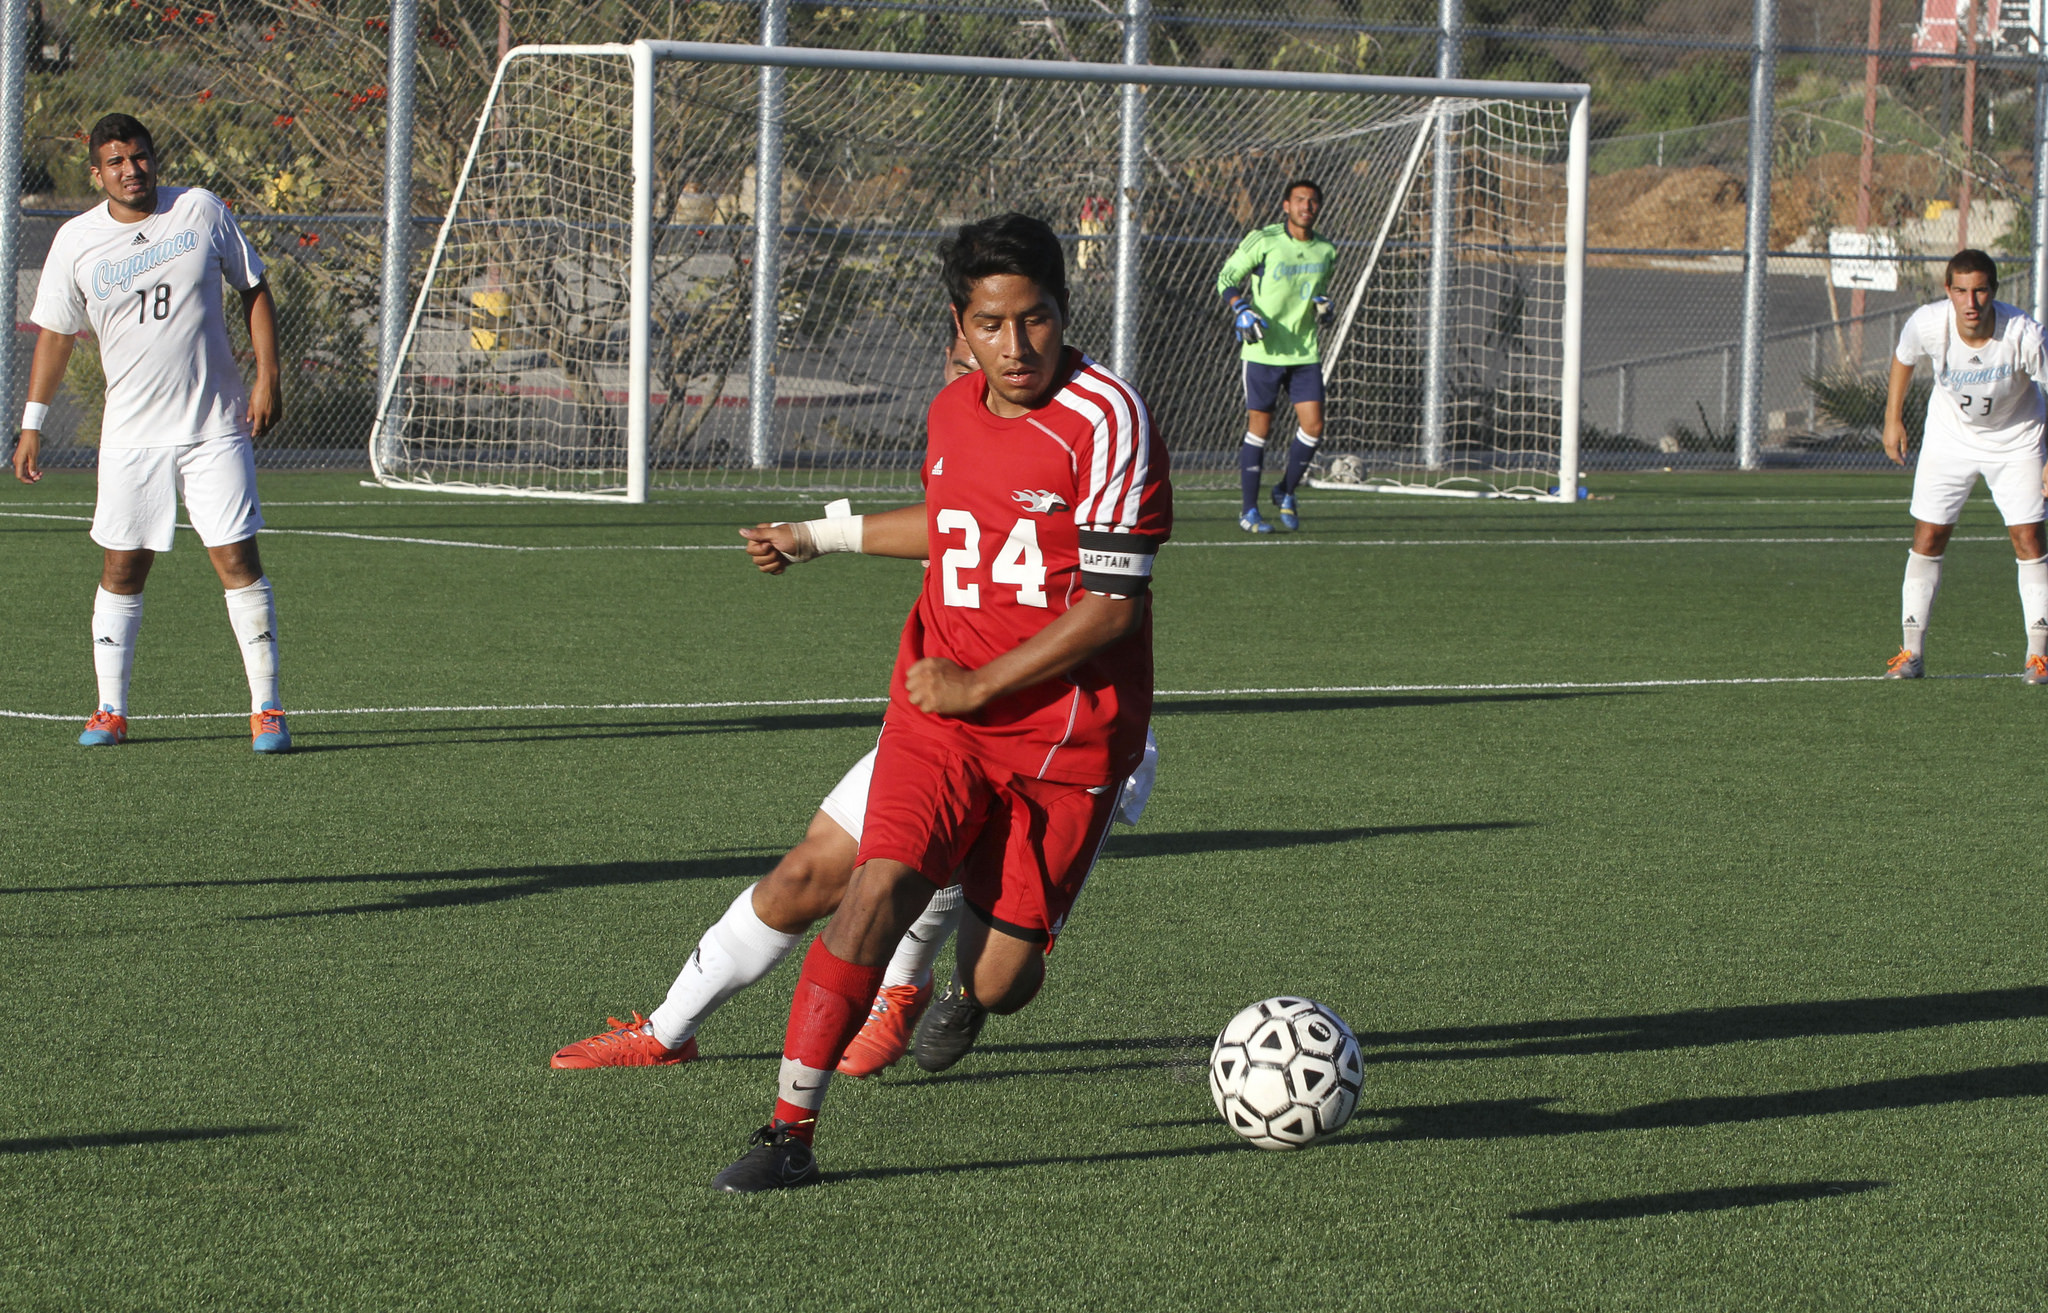 Palomar's midfielder Miguel Pineda (No.24) dribbles past a defender during a game against Cuyamaca on October 24th at Minkoff Field San Marcos, California. Comet's 2-0 loss to Cuyamaca. 